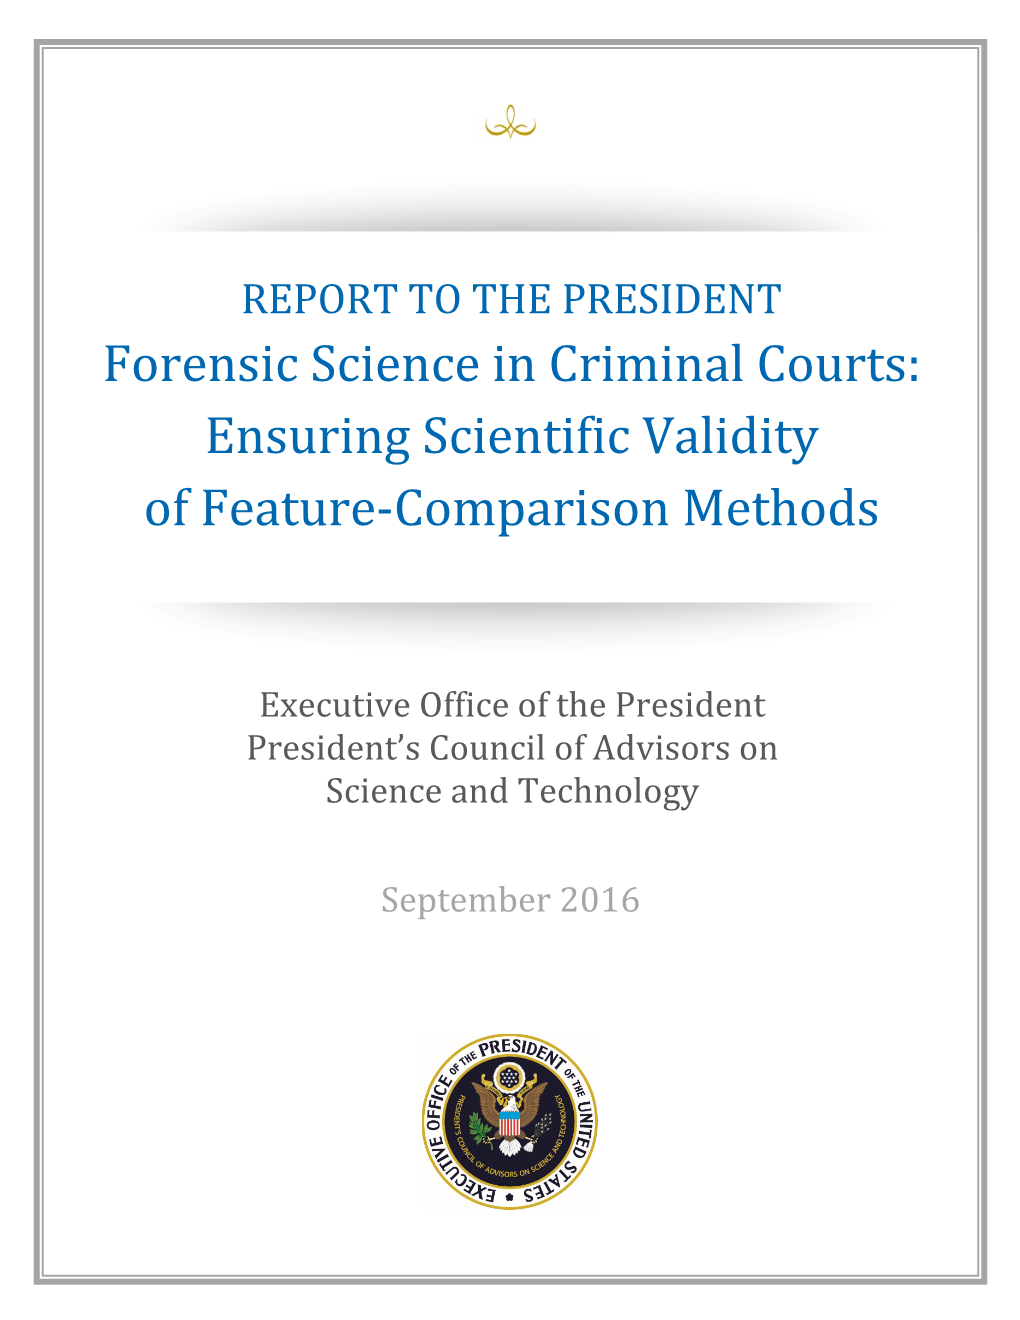 Forensic Science in Criminal Courts: Ensuring Scientific Validity of Feature-Comparison Methods